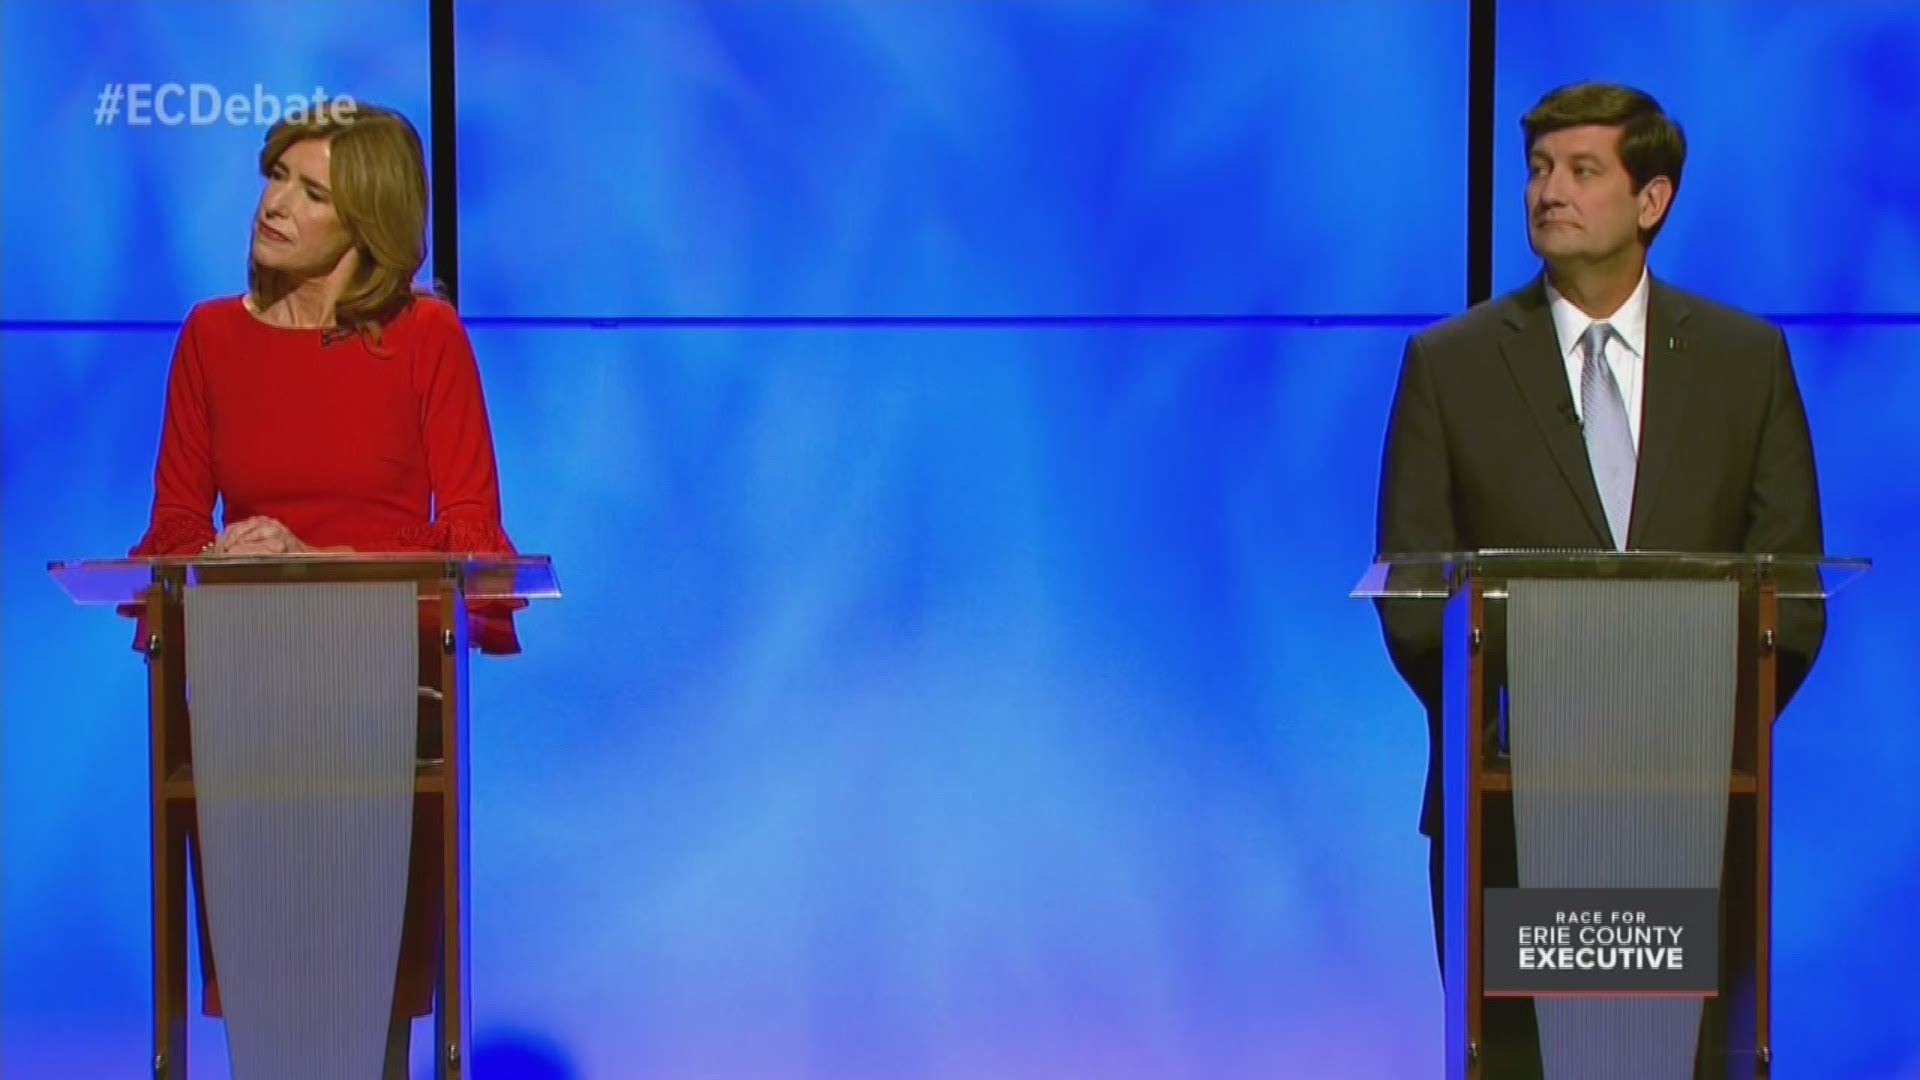 WGRZ, WNED, WBFO, and The Buffalo News hosted a debate between incumbent Democrat Mark Poloncarz and Independence party challenger Lynne Dixon on Thursday night.